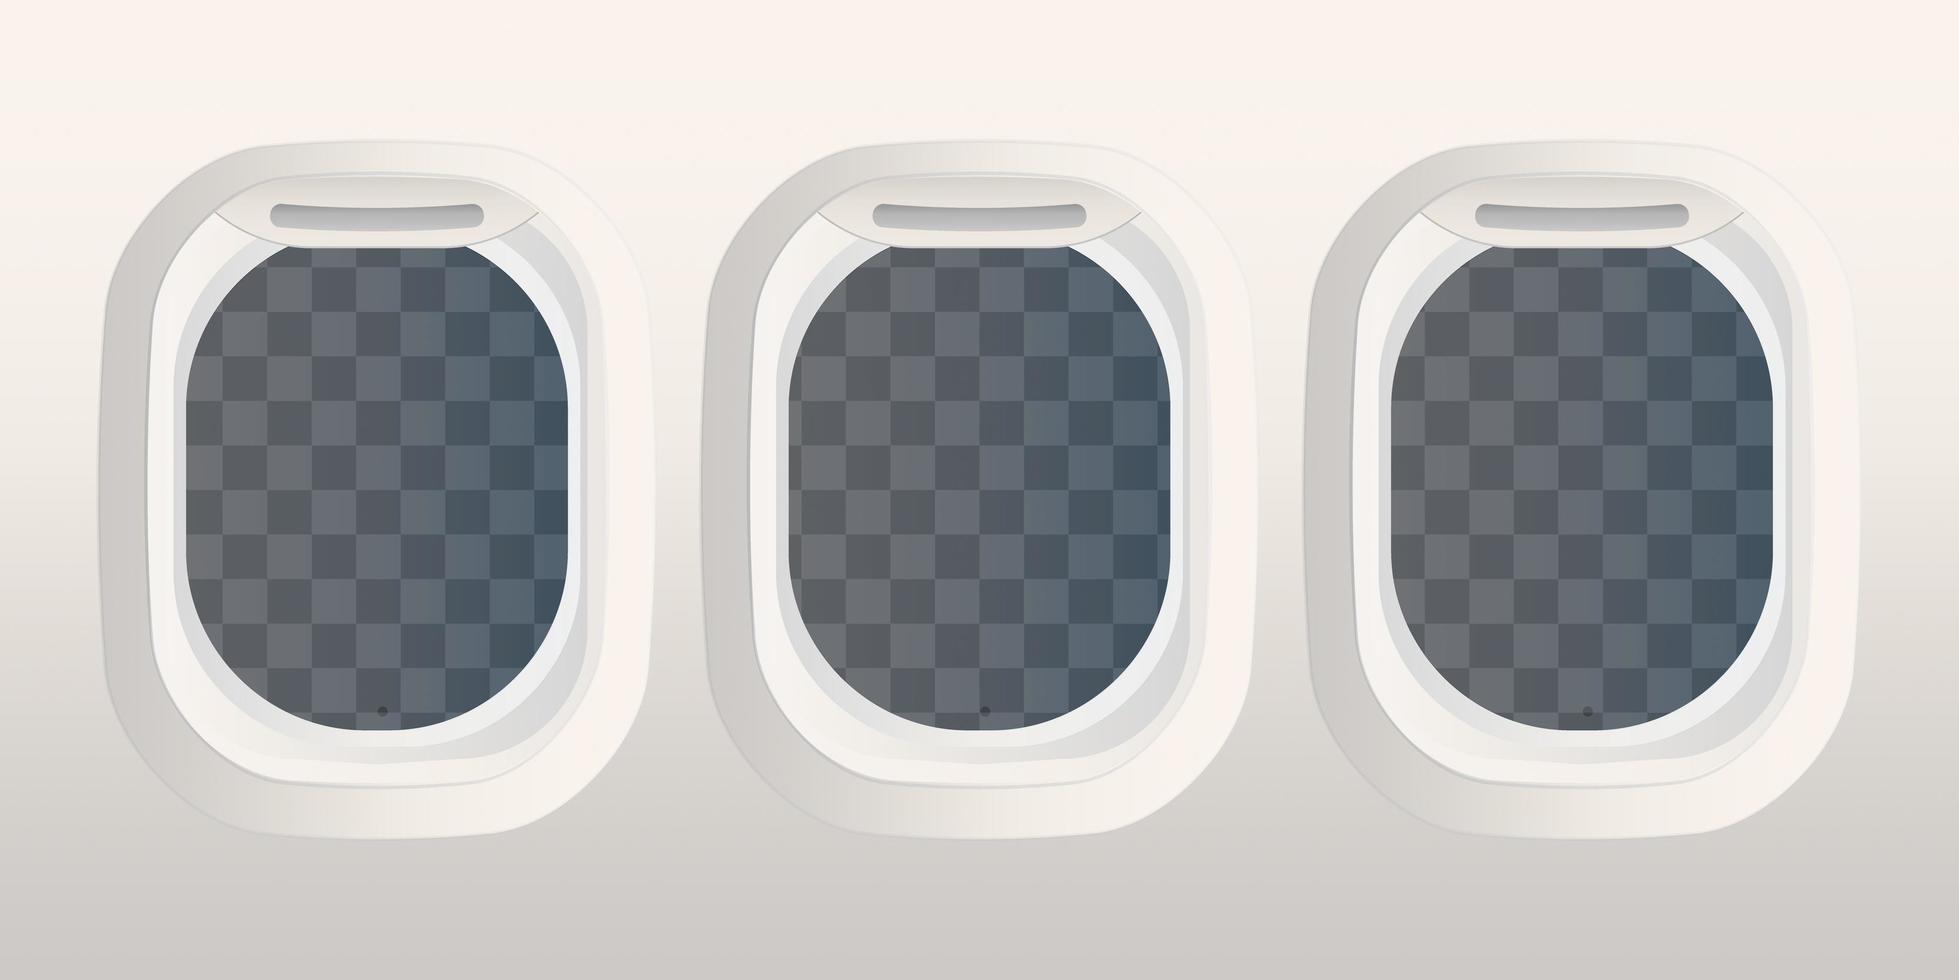 Realistic rectangular portholes with transparent glass. Airplane and space shuttle window. Vector illustration